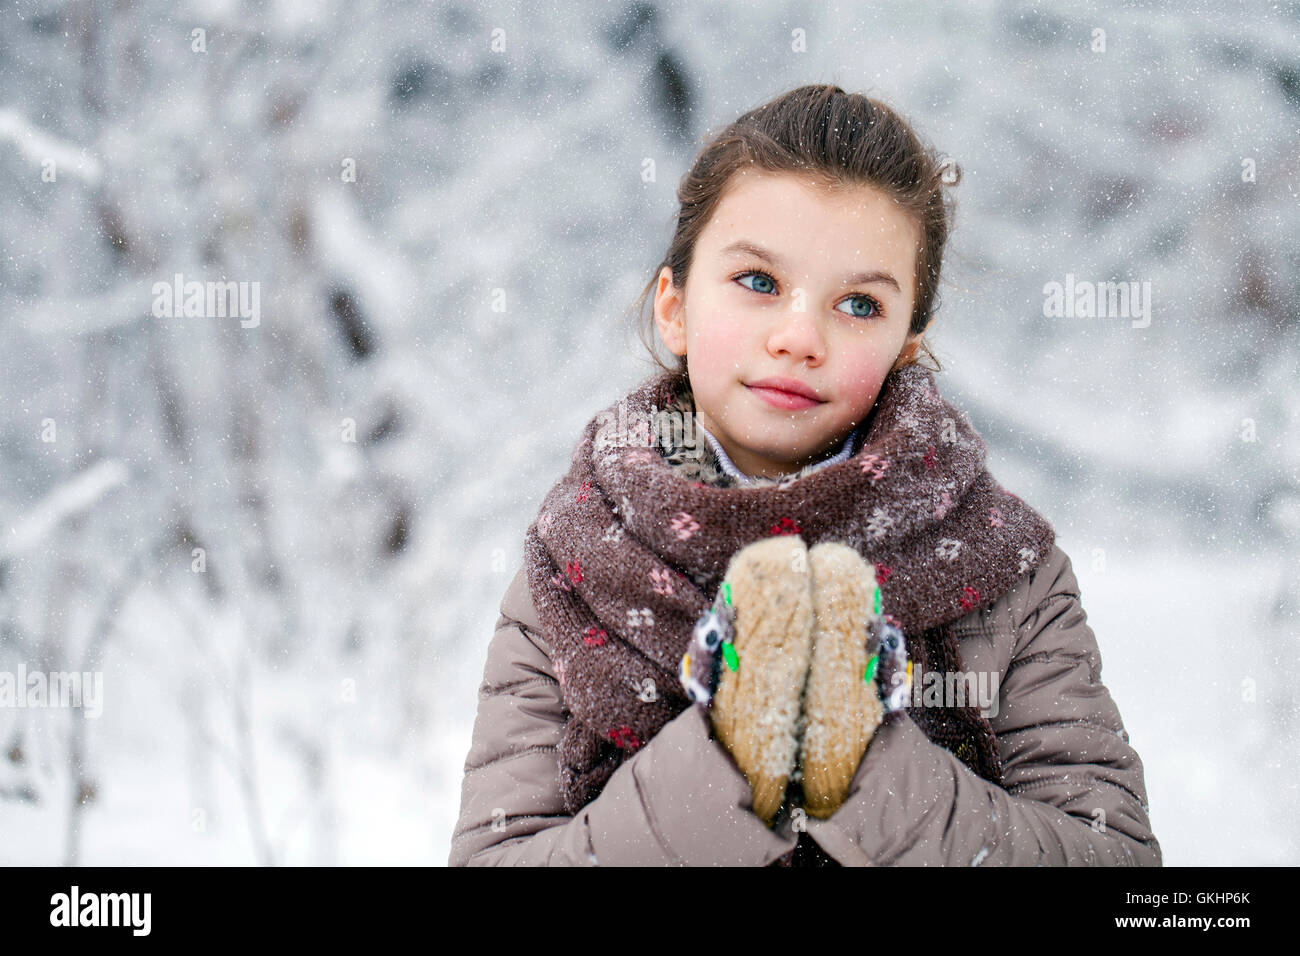 Little girl with winter clothes standing in the snow outdoor Stock Photo -  Alamy